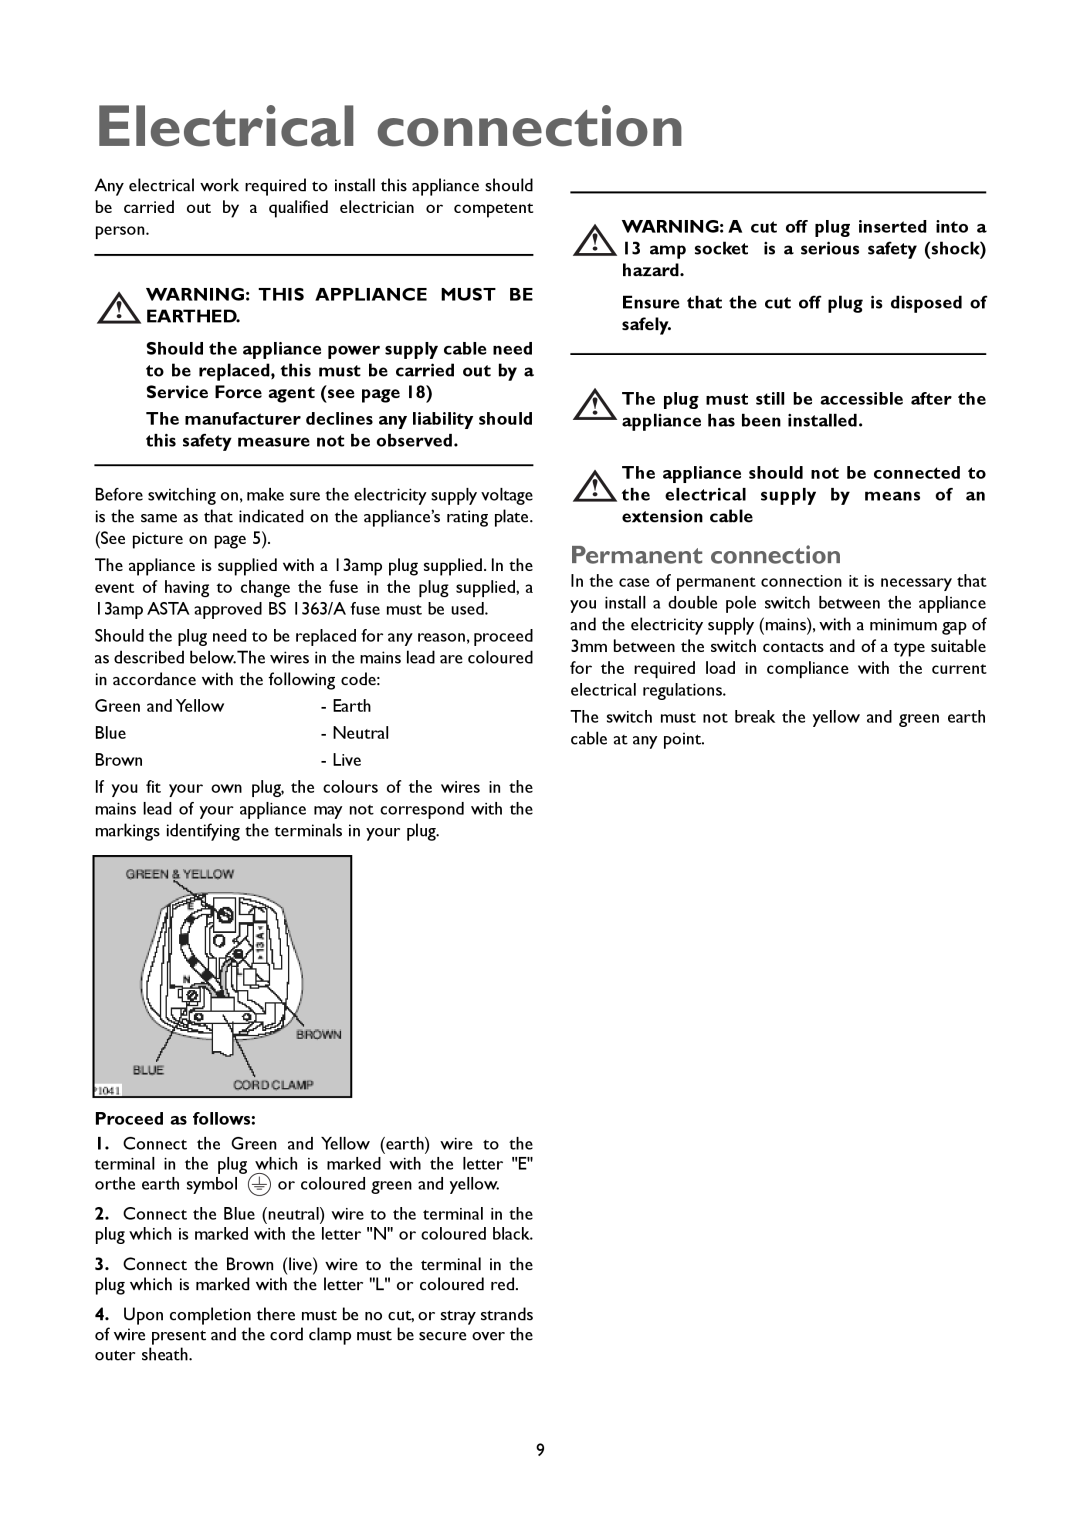 John Lewis JLFFW2004 instruction manual Electrical connection, Permanent connection 